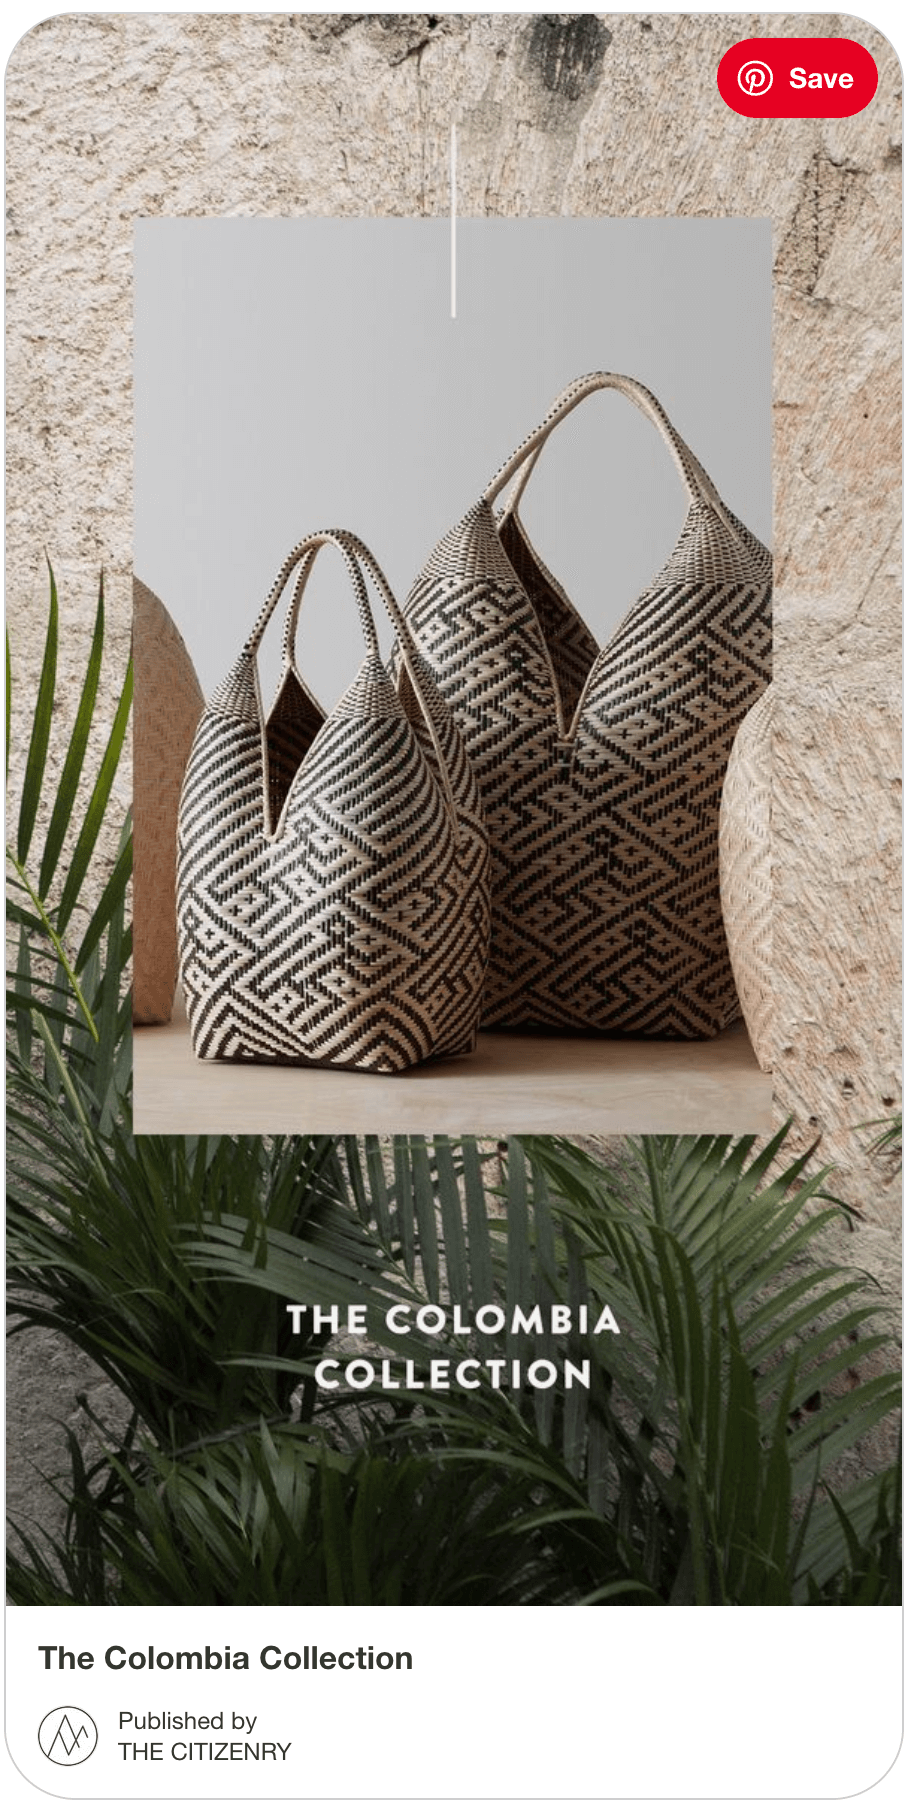 A collection ad for The Citizenry's Colombia Collection. The image features two handbags of different sizes